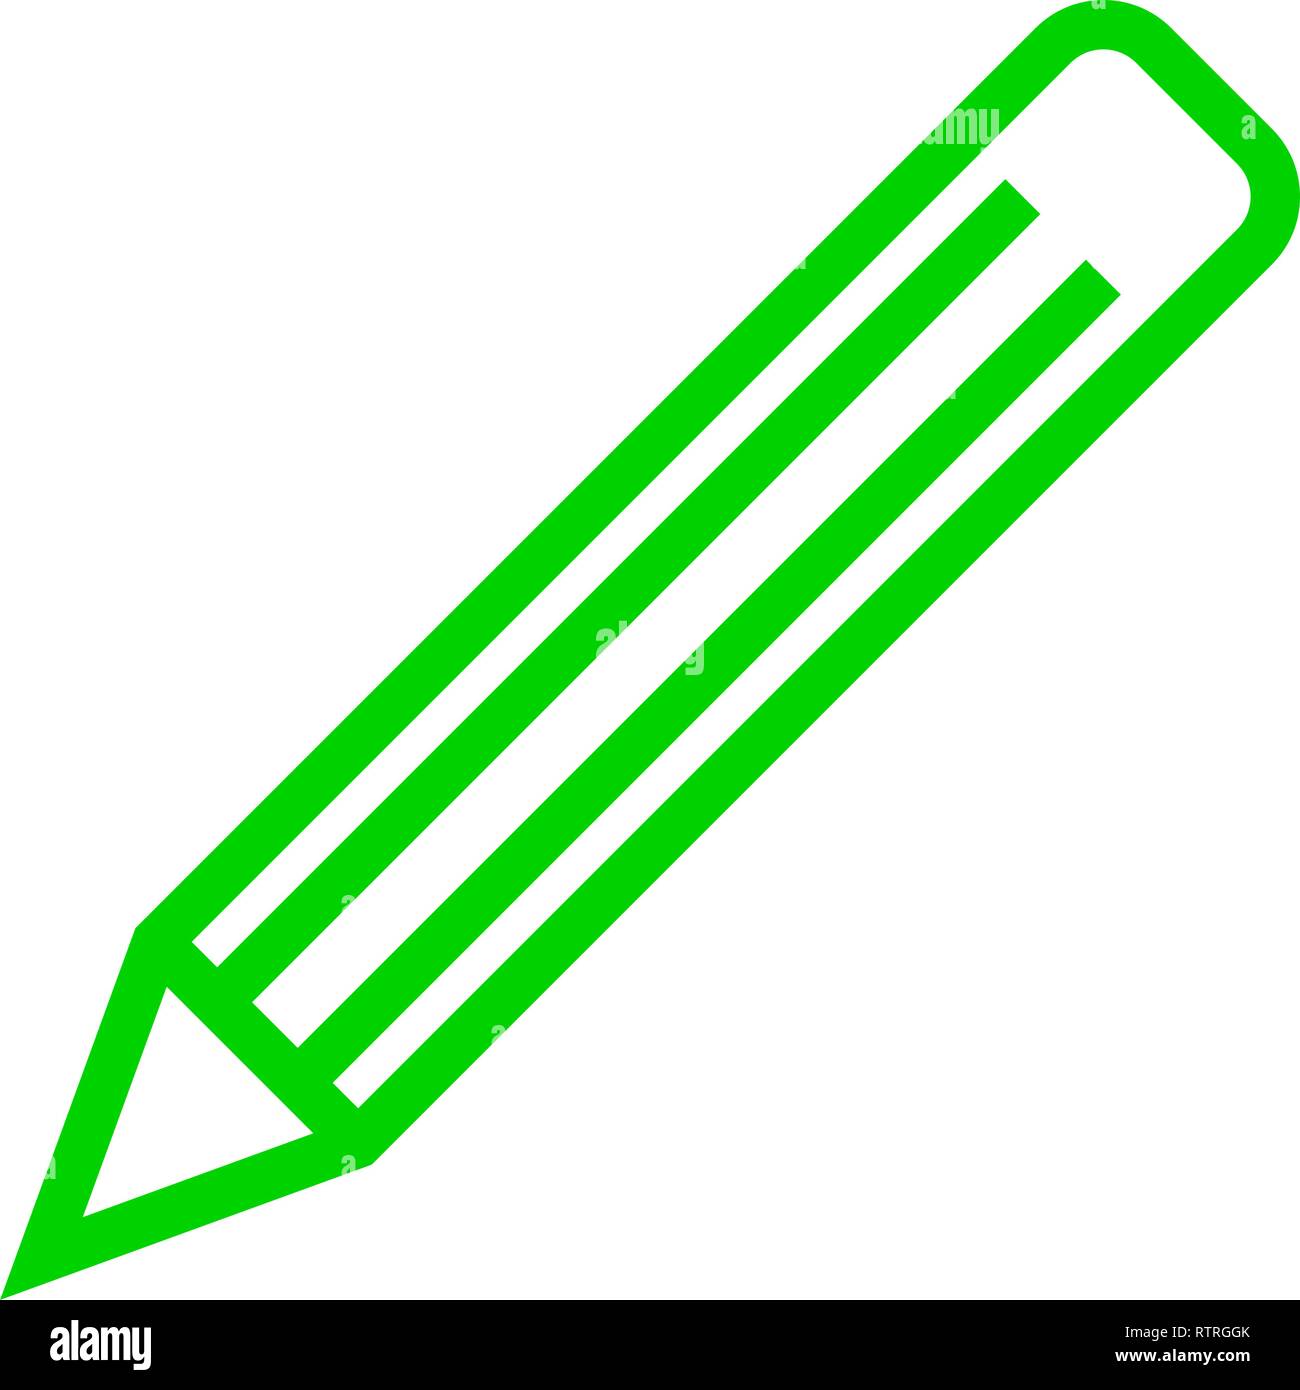 Pencil symbol icon - green simple outline, isolated - vector ...